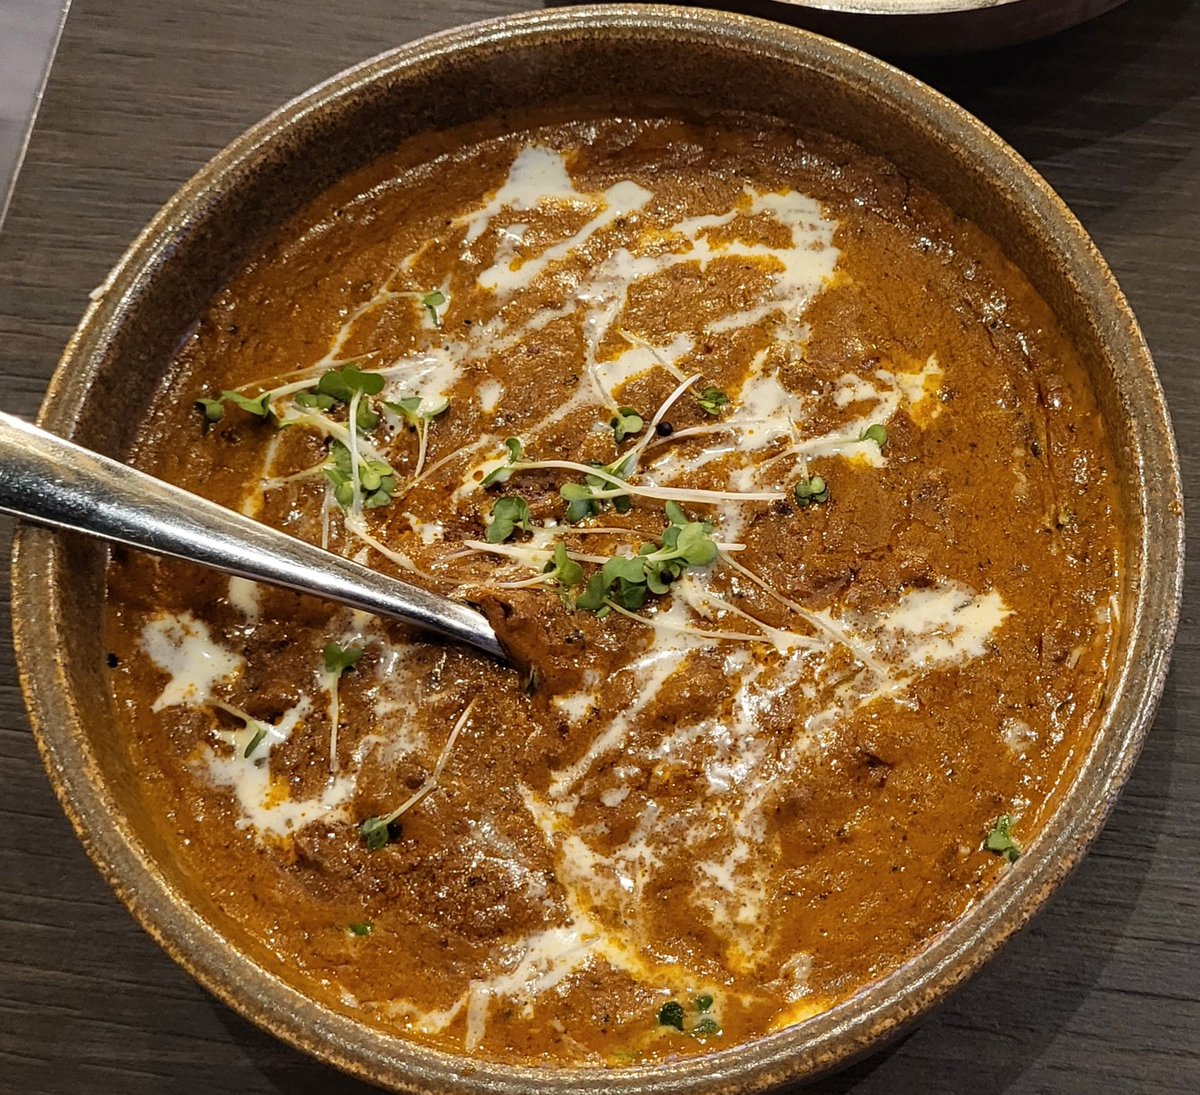 My second time to have dal makhani, this time in Kari in Inchicore. Delicious. Great addition to the neighbourhood.